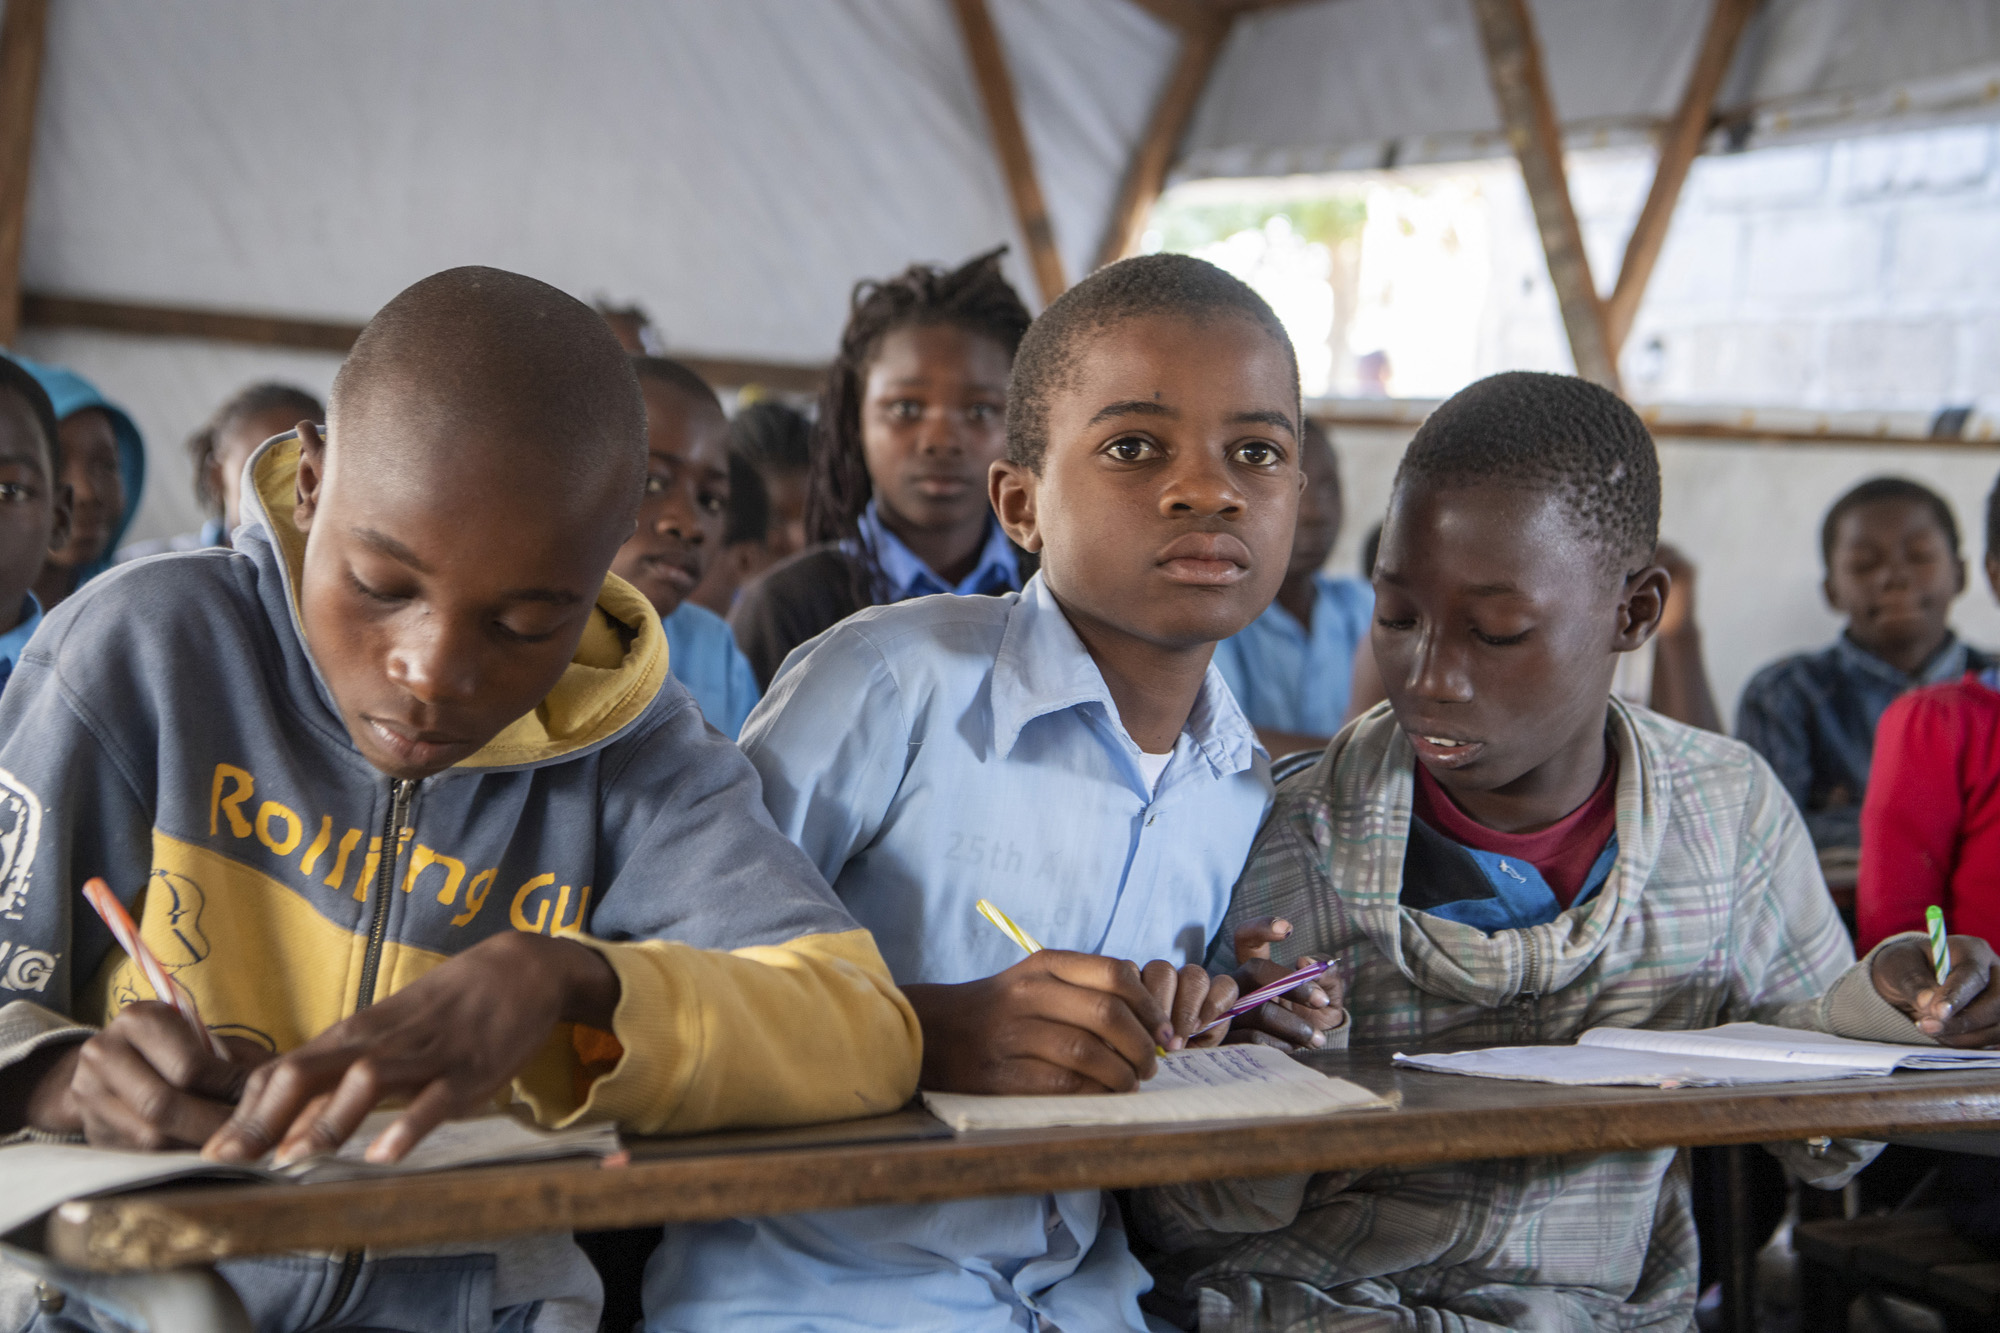 Students participate in a class at "25 de Junho" in Mozambique.